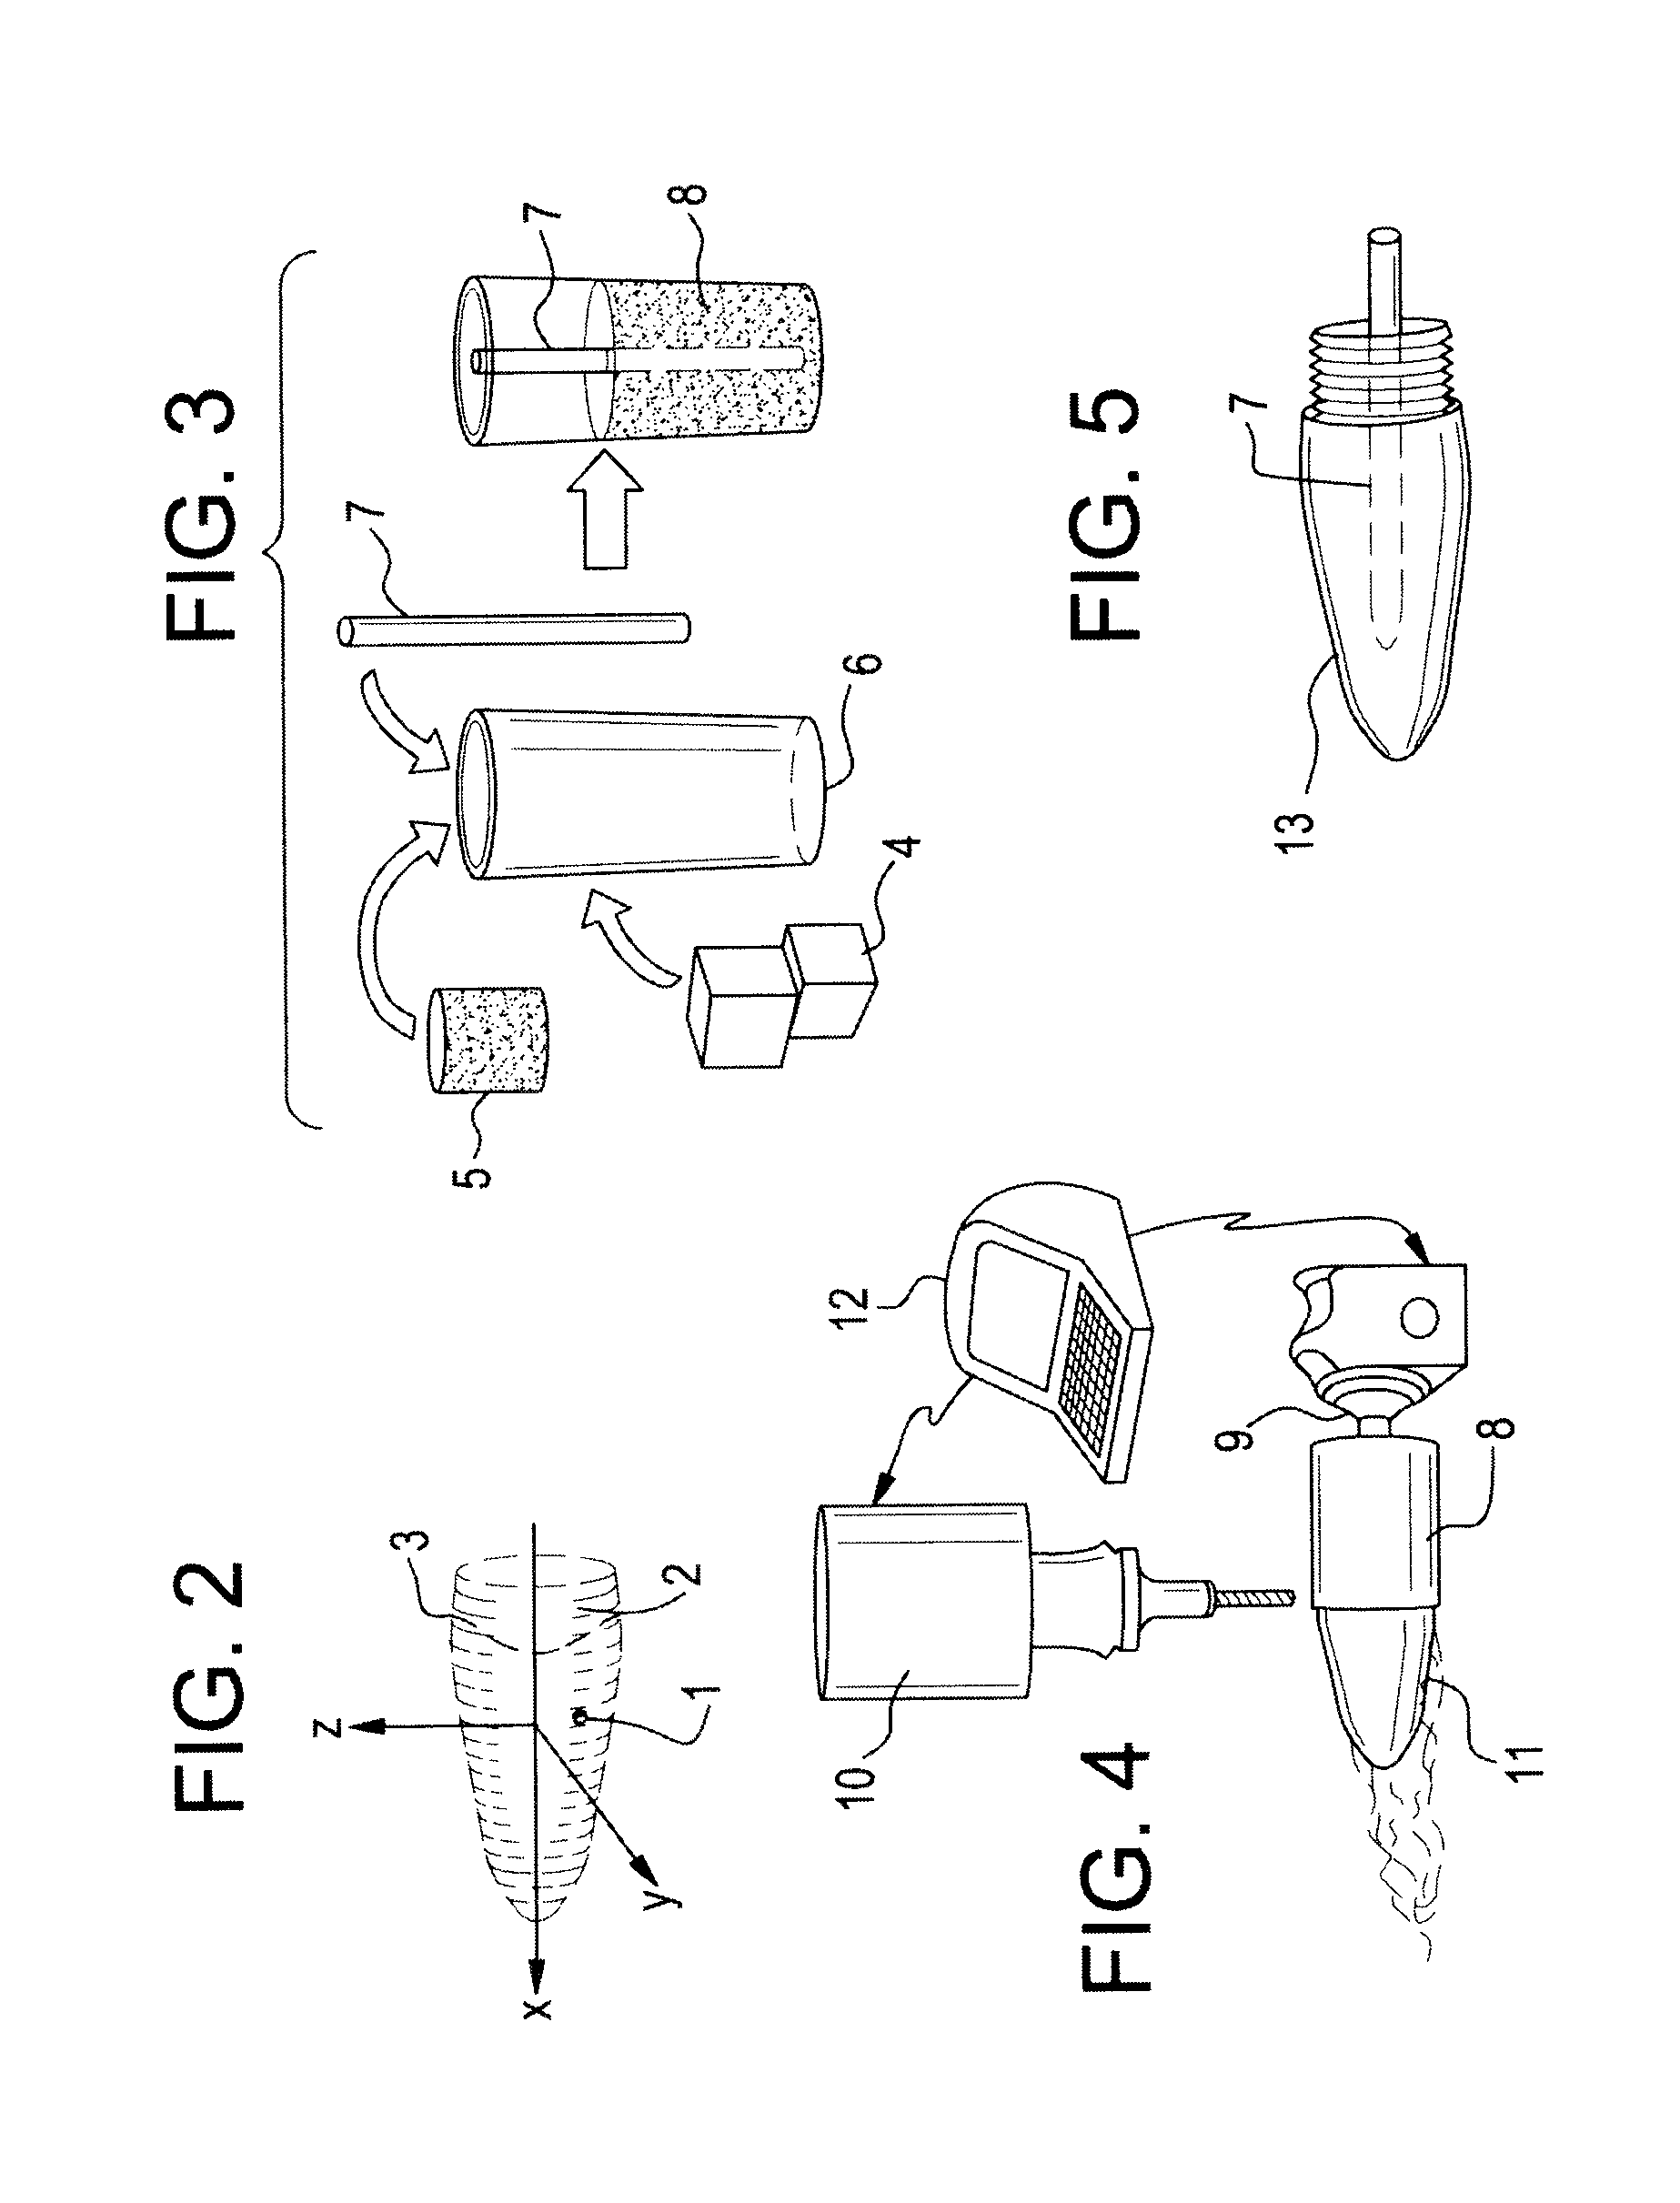 Braided prosthetic sockets with attachment plates and methods of manufacture